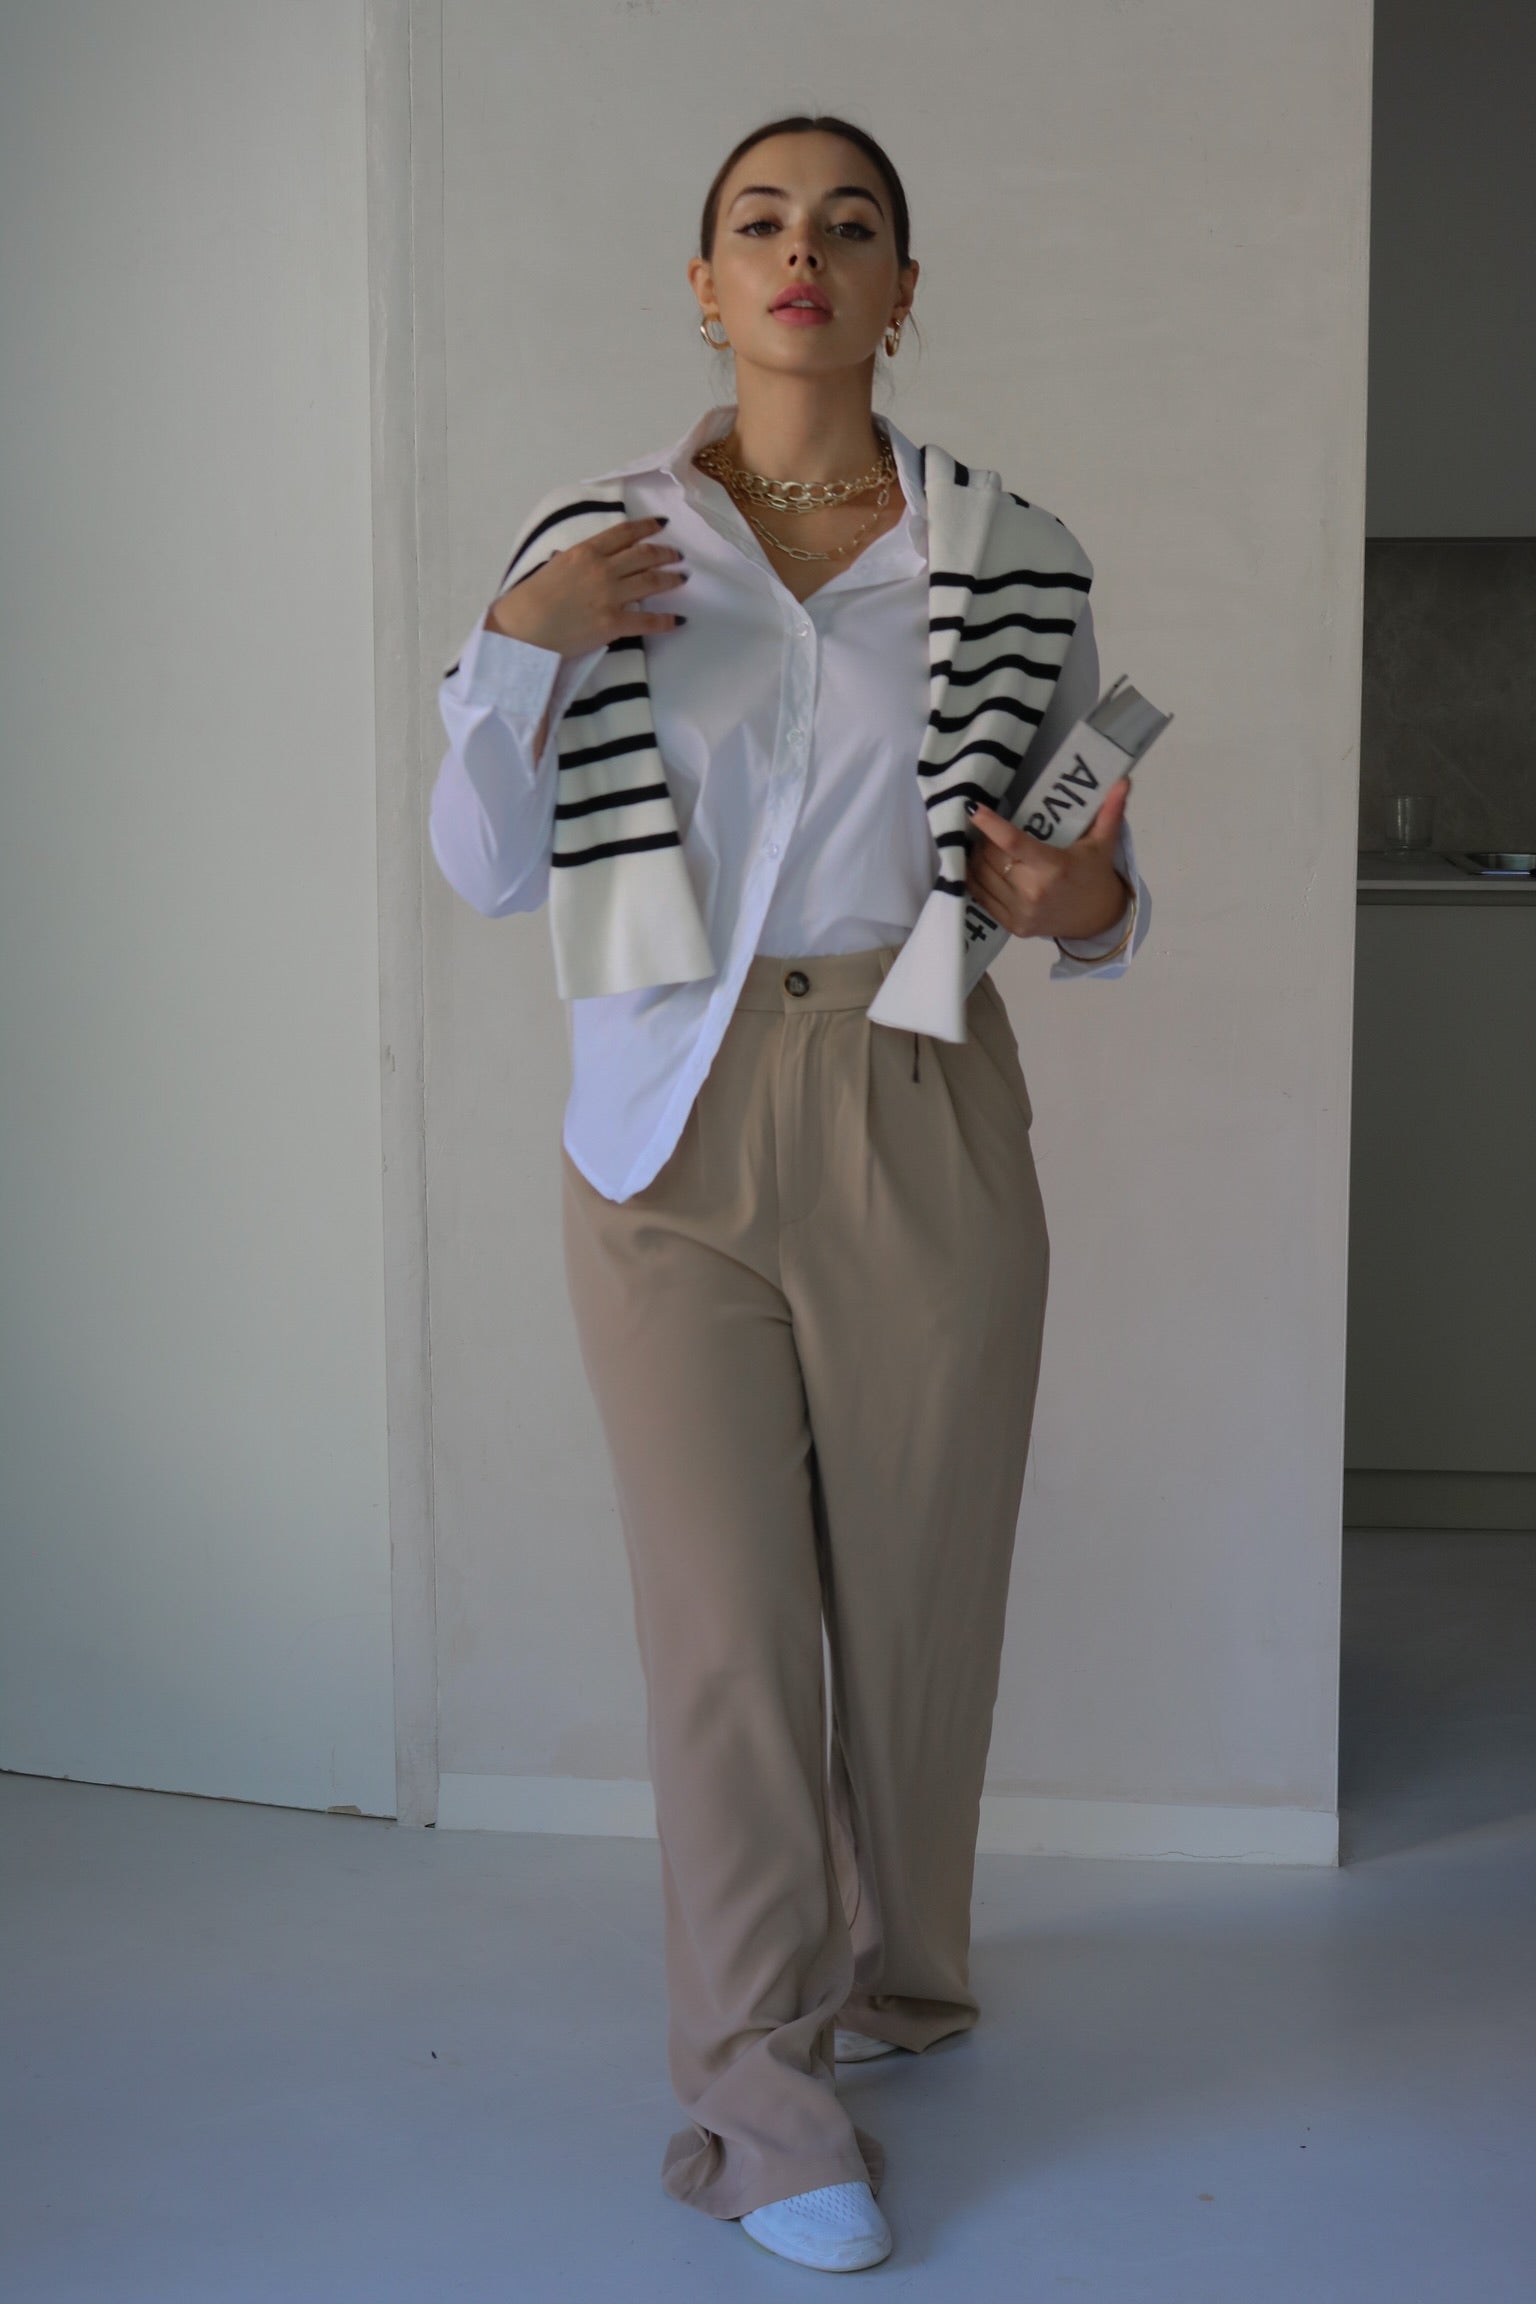 Classic Solid Collared Button Down Shirt in White. Scarlette The Label, an online fashion boutique for women.